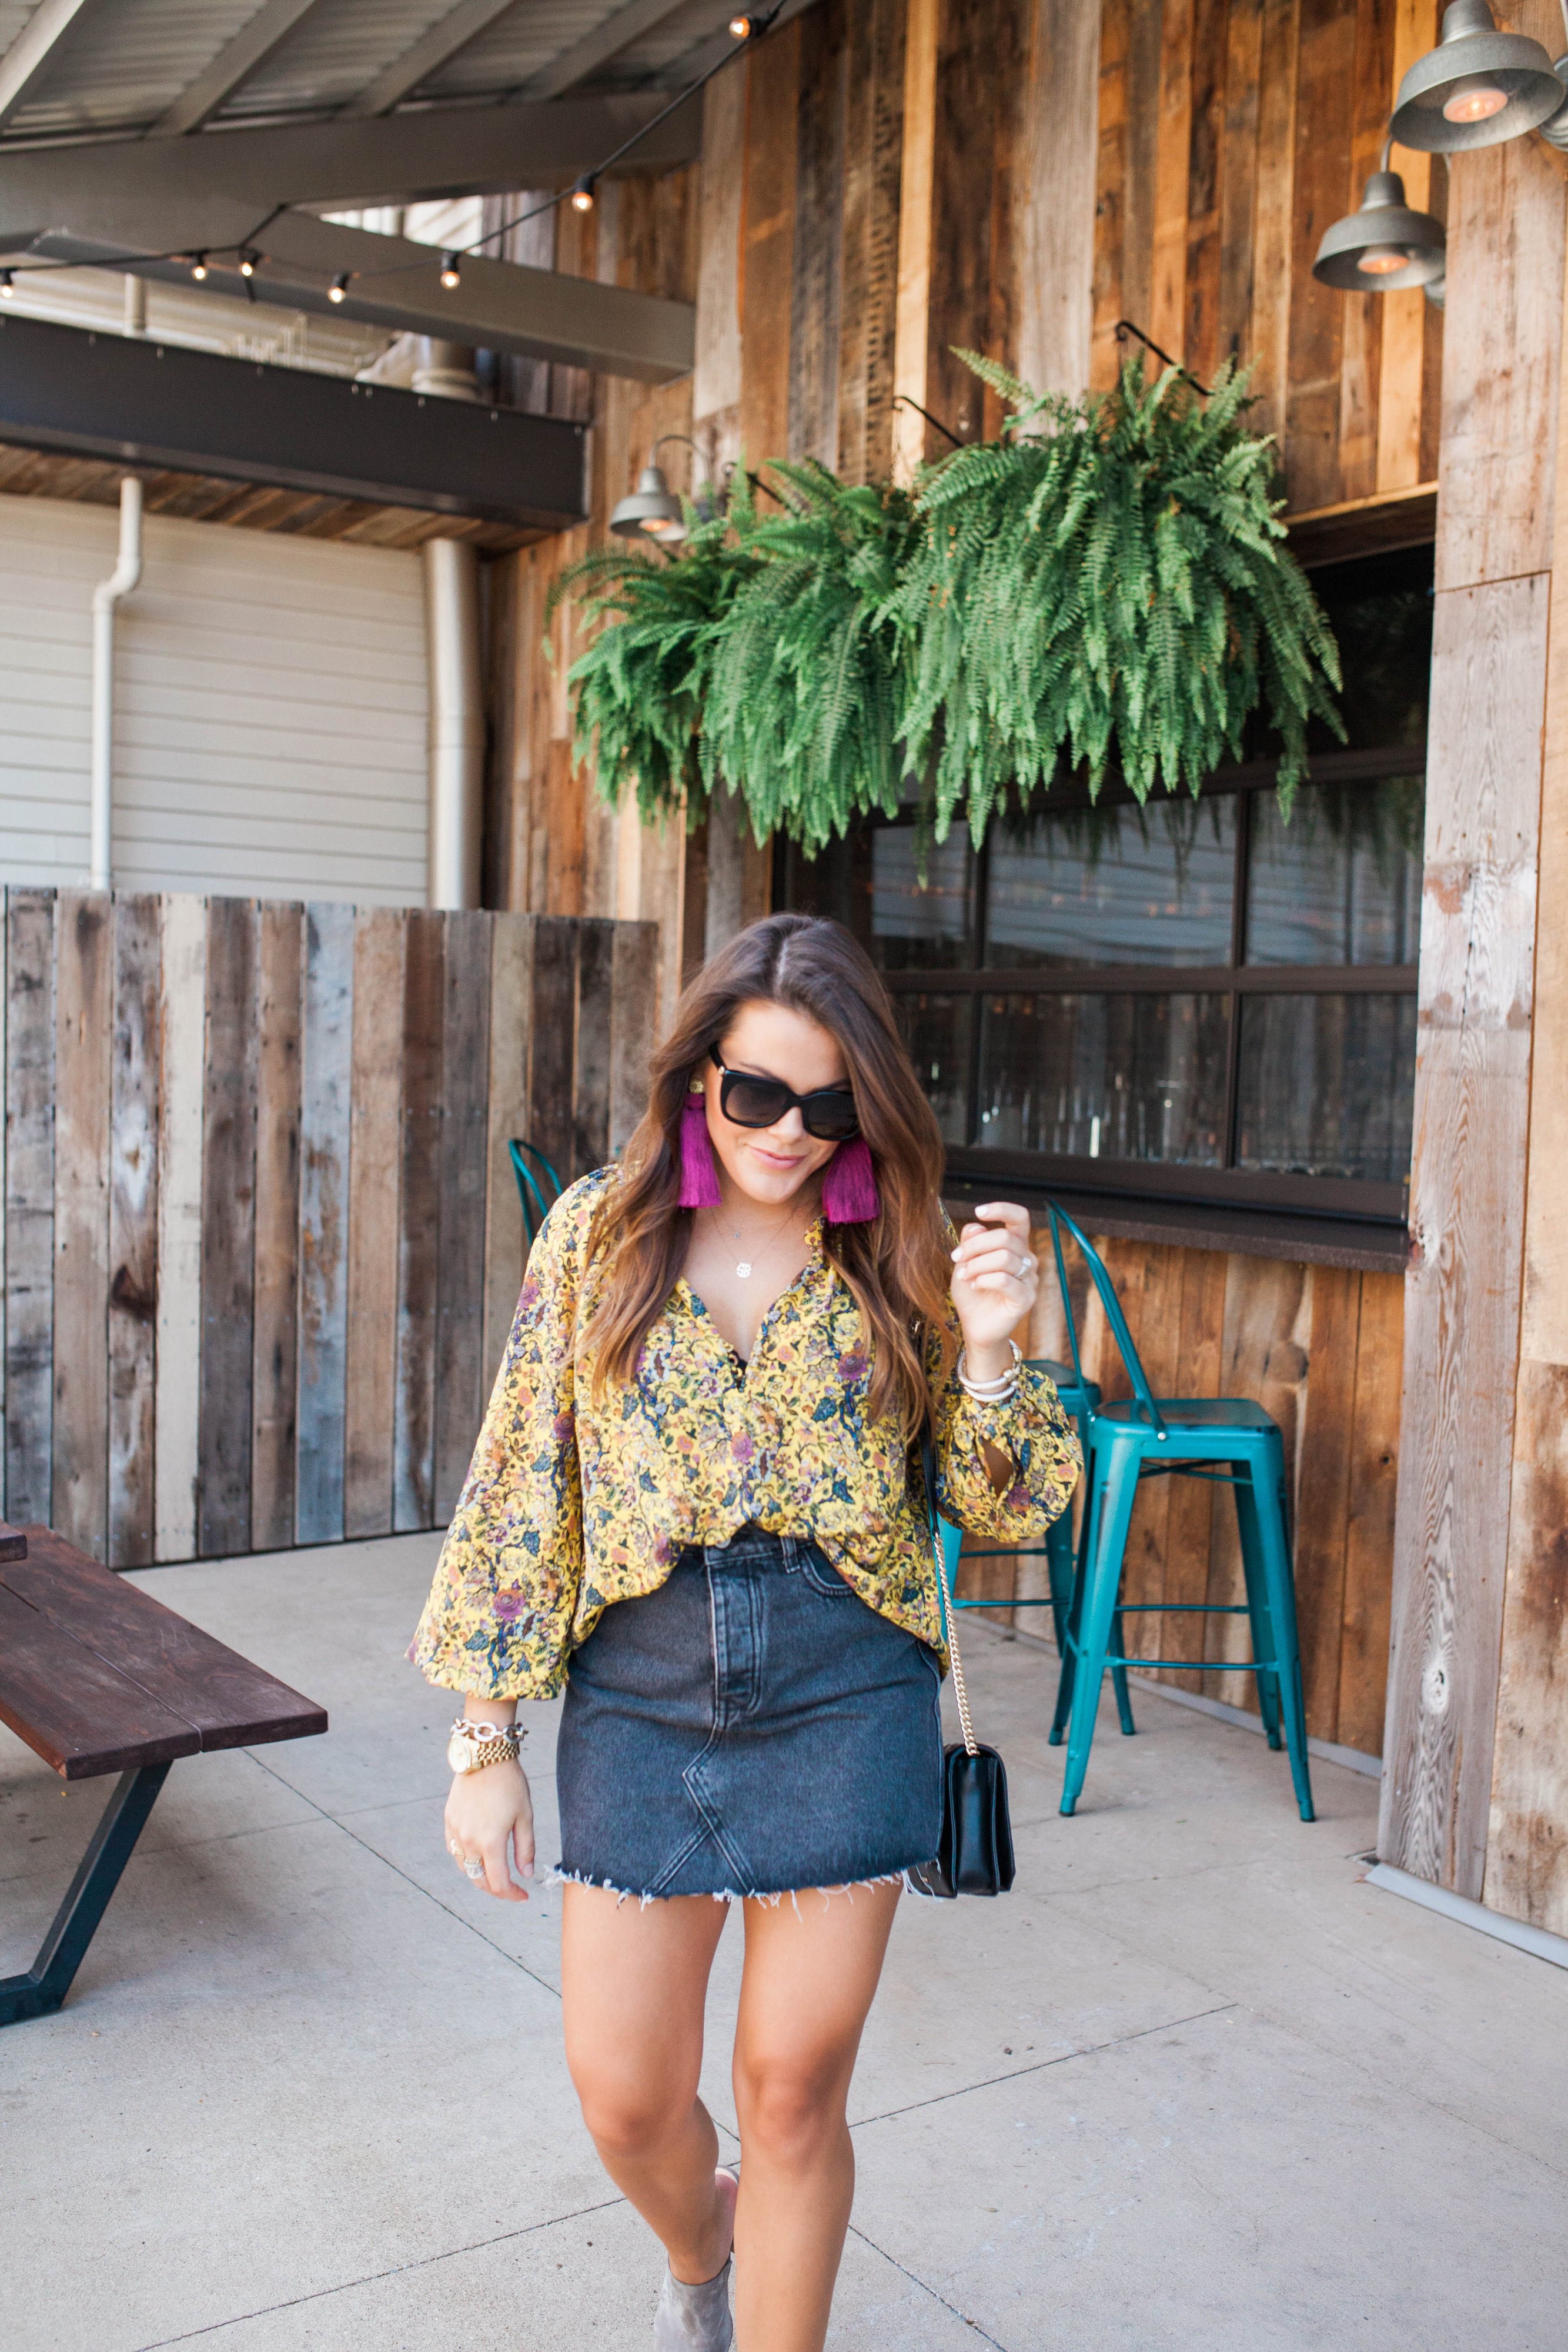 How to make florals edgy / edgy fall florals 